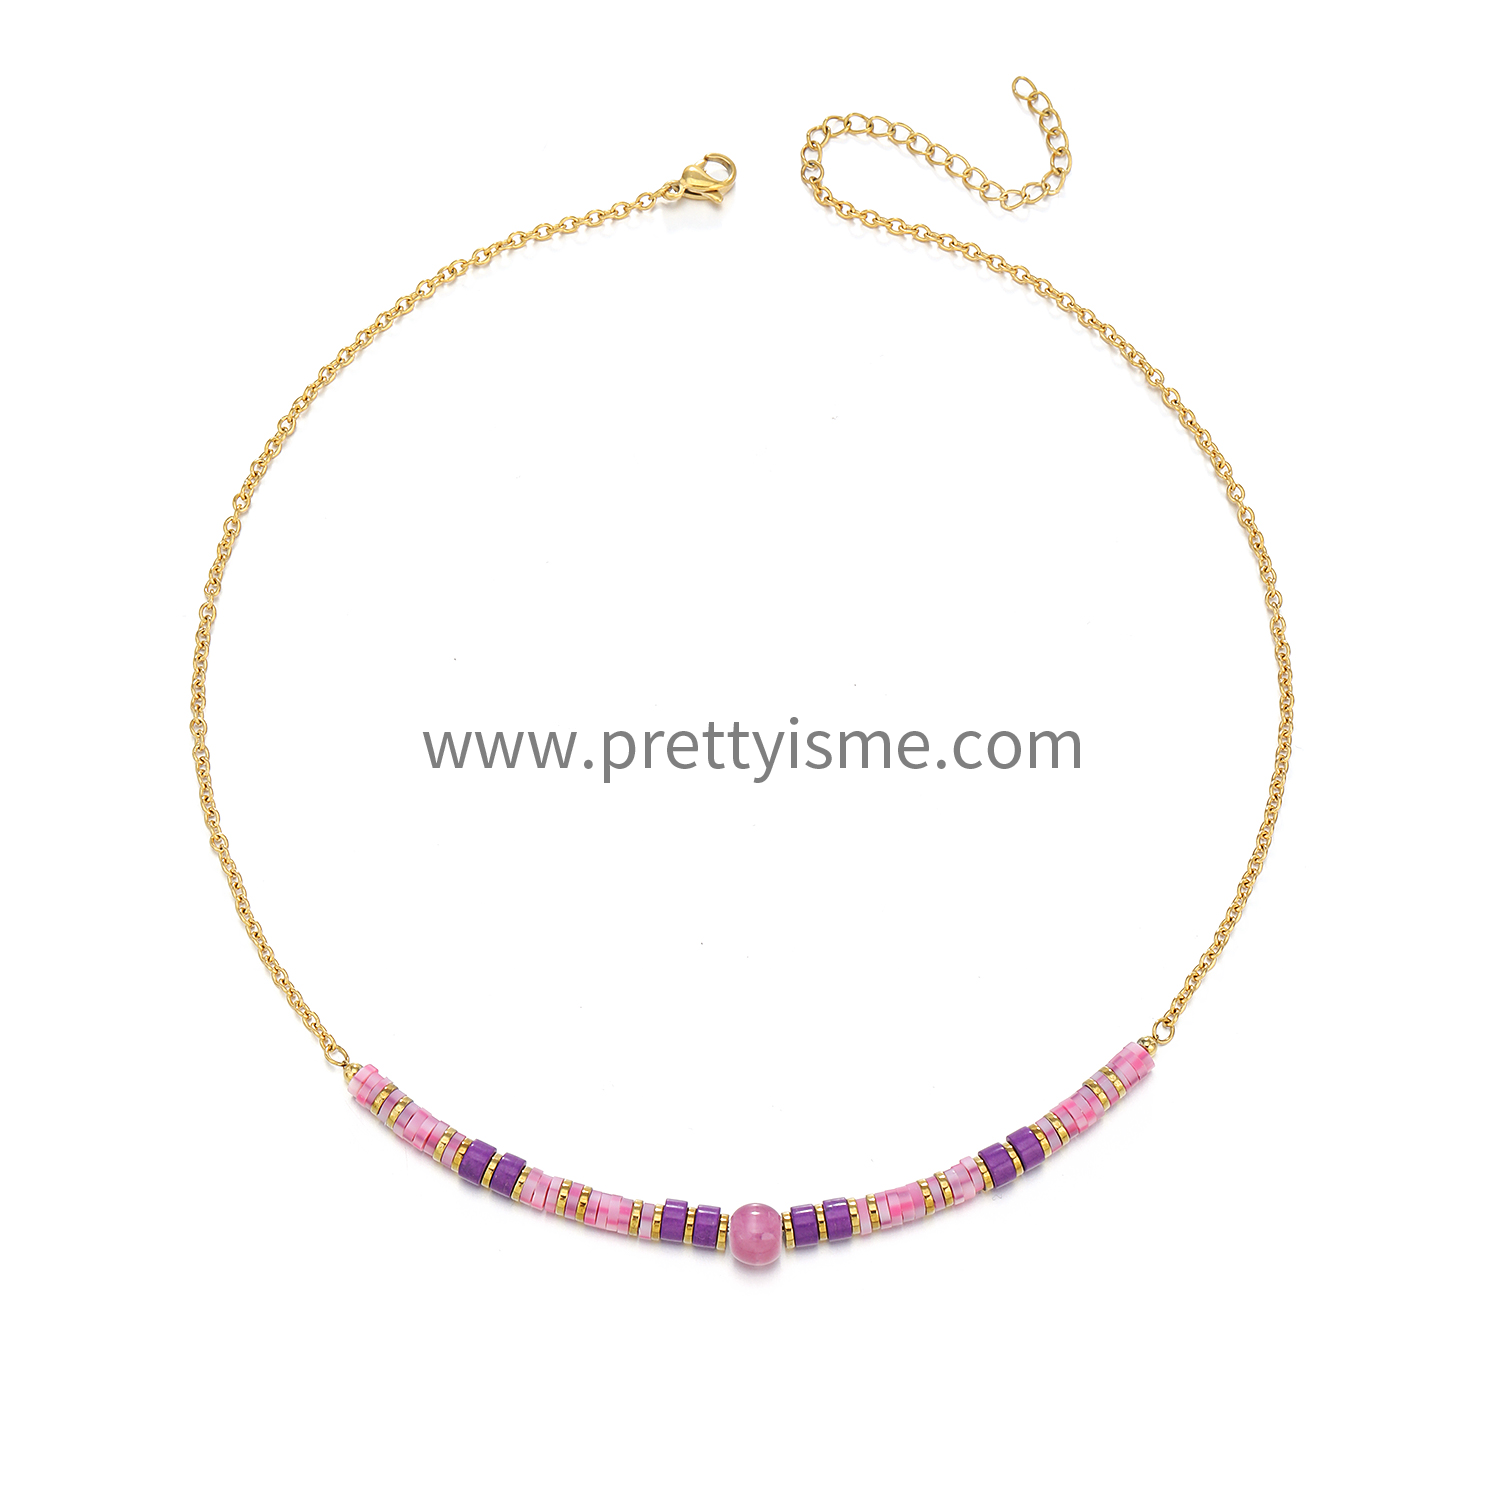 Pretty Is Me Collection Wholesale 18K Gold Plated Stainless Steel Beads Beaded Pink Purple Polymer Clay Choker Necklace Women (6).webp